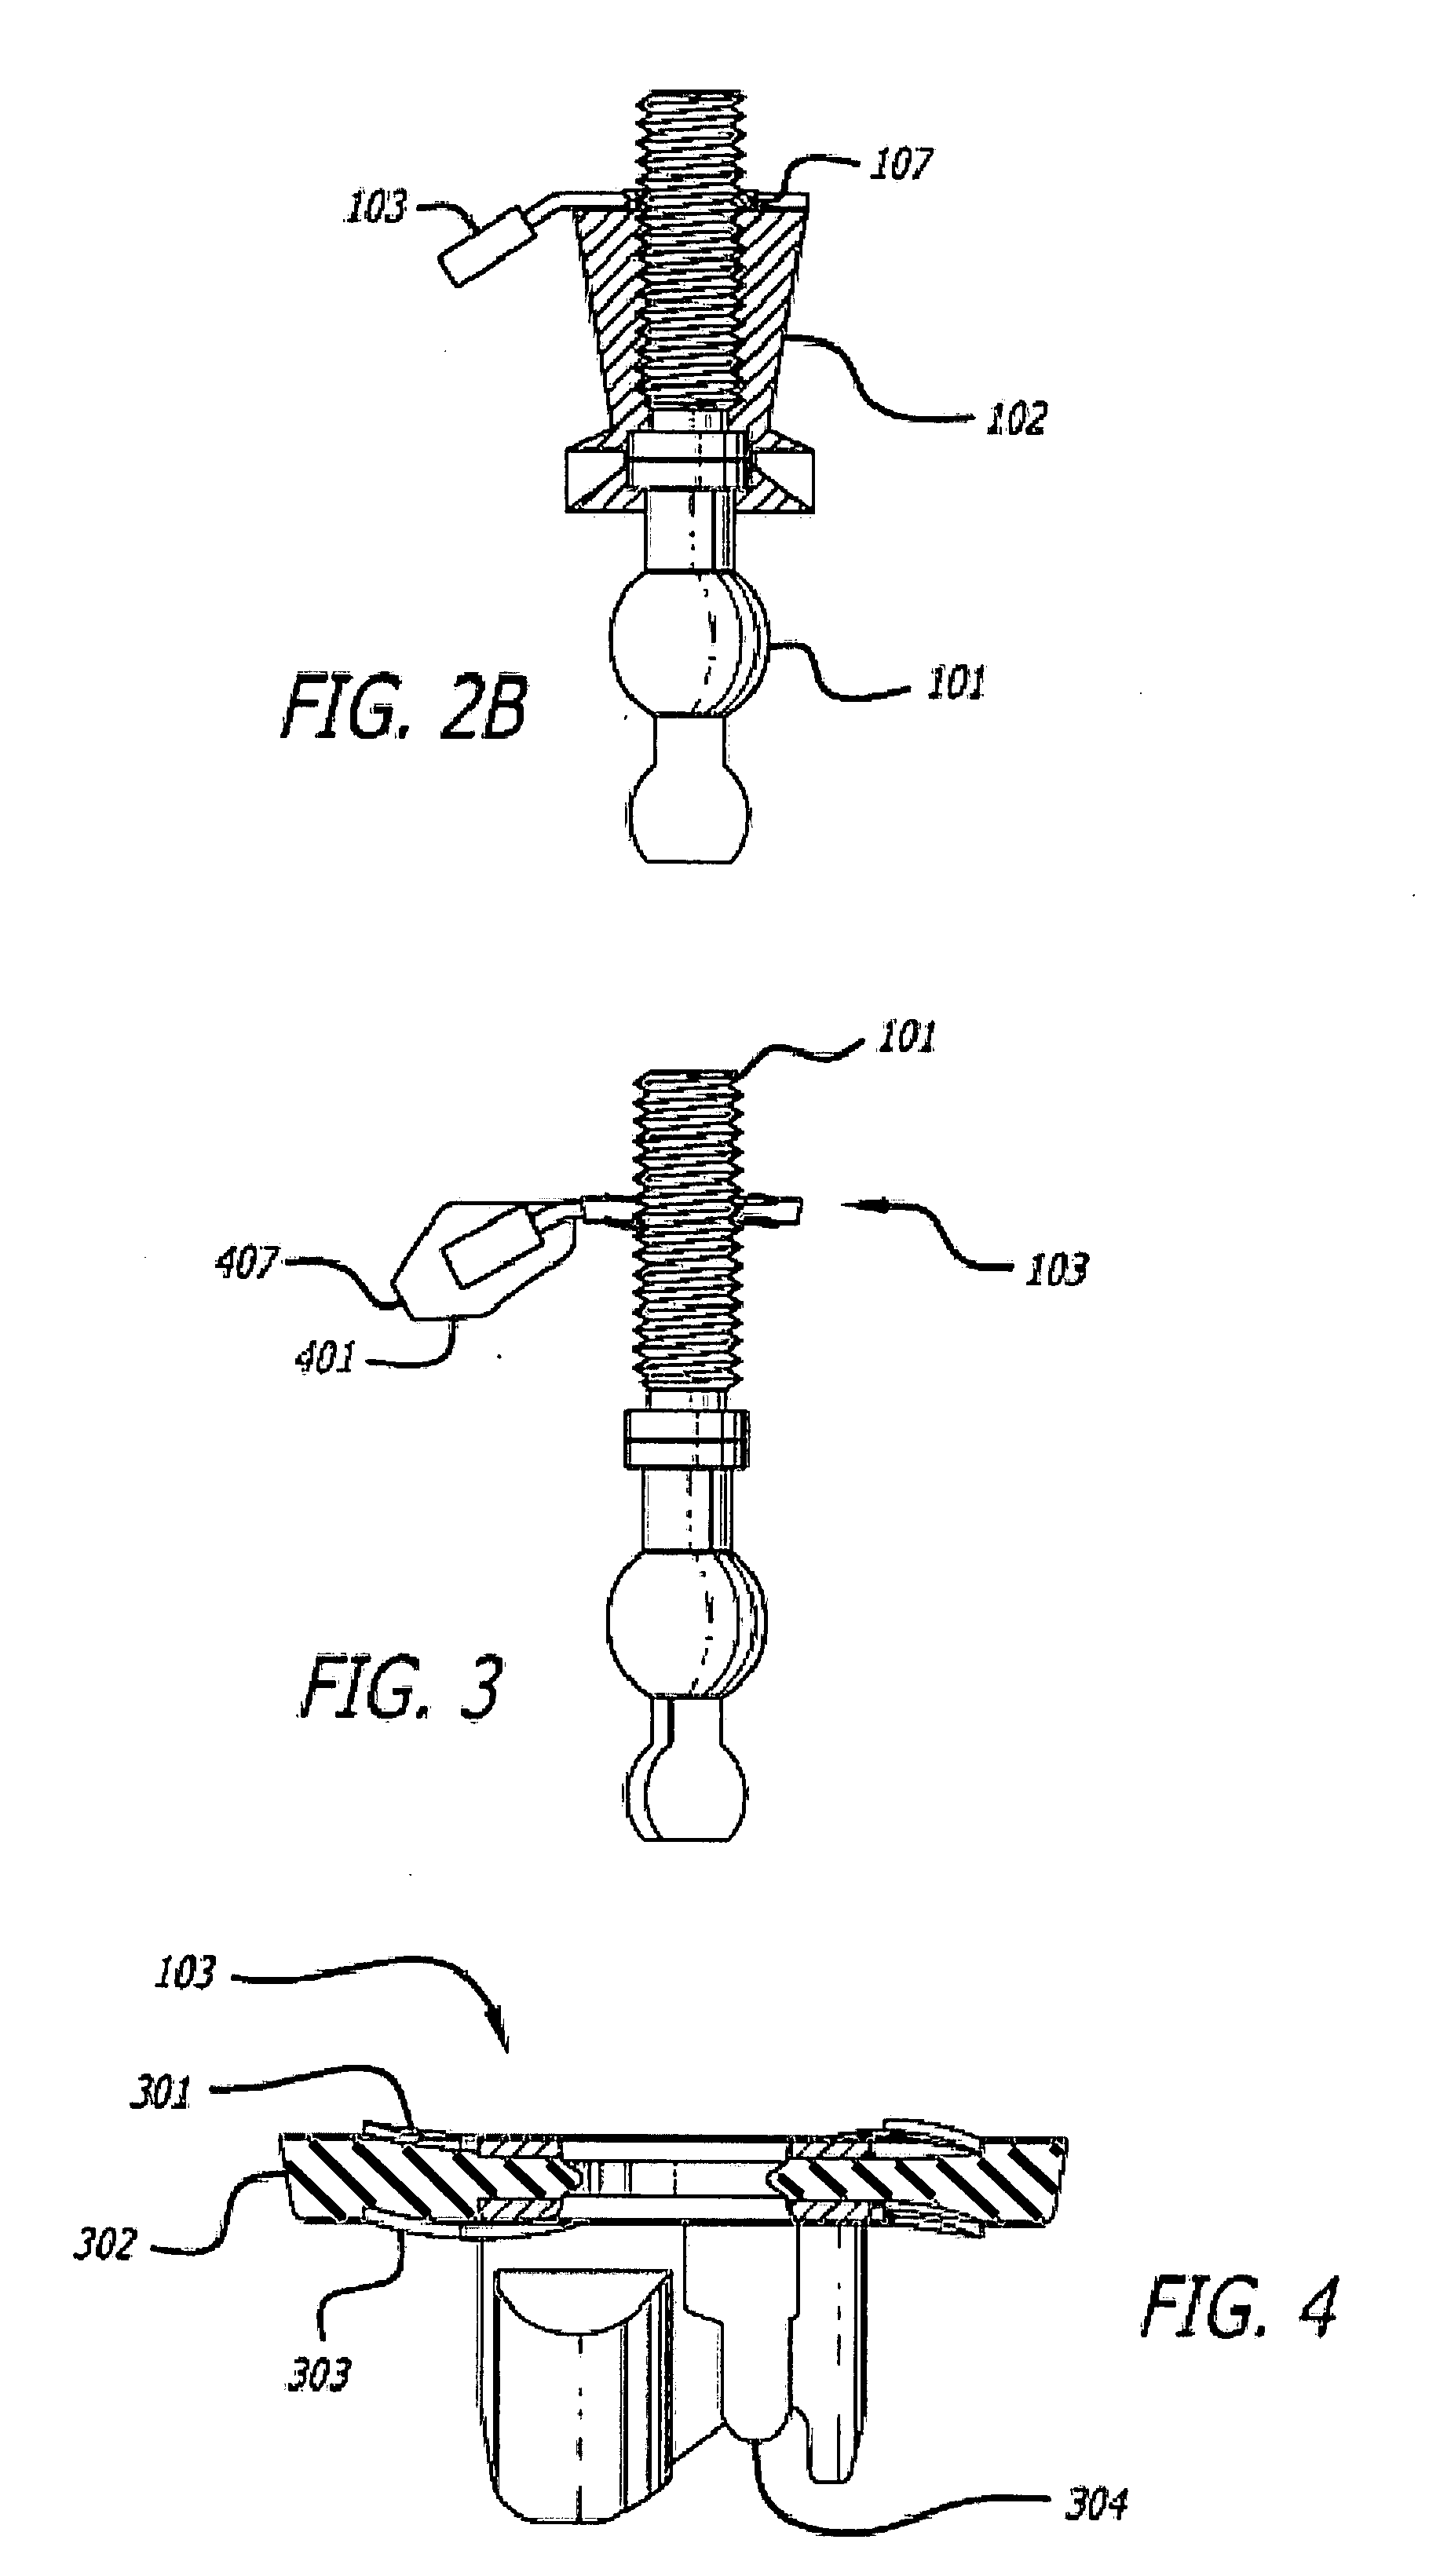 Systems and methods for powered tap assemblies